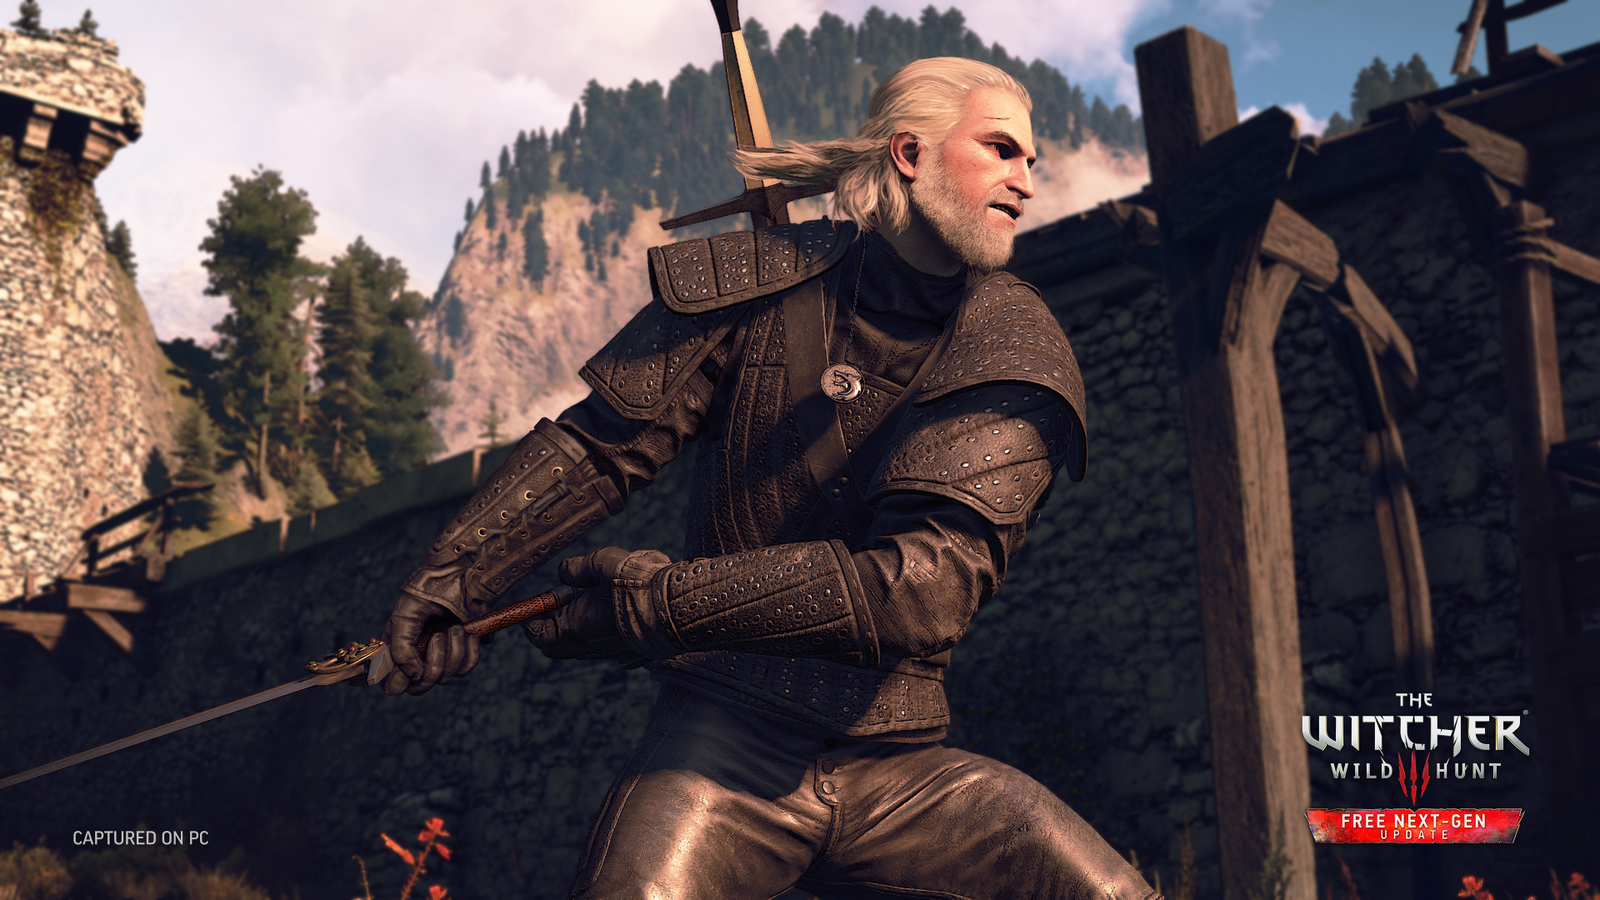 Witcher 3 next-gen update everything you to know |